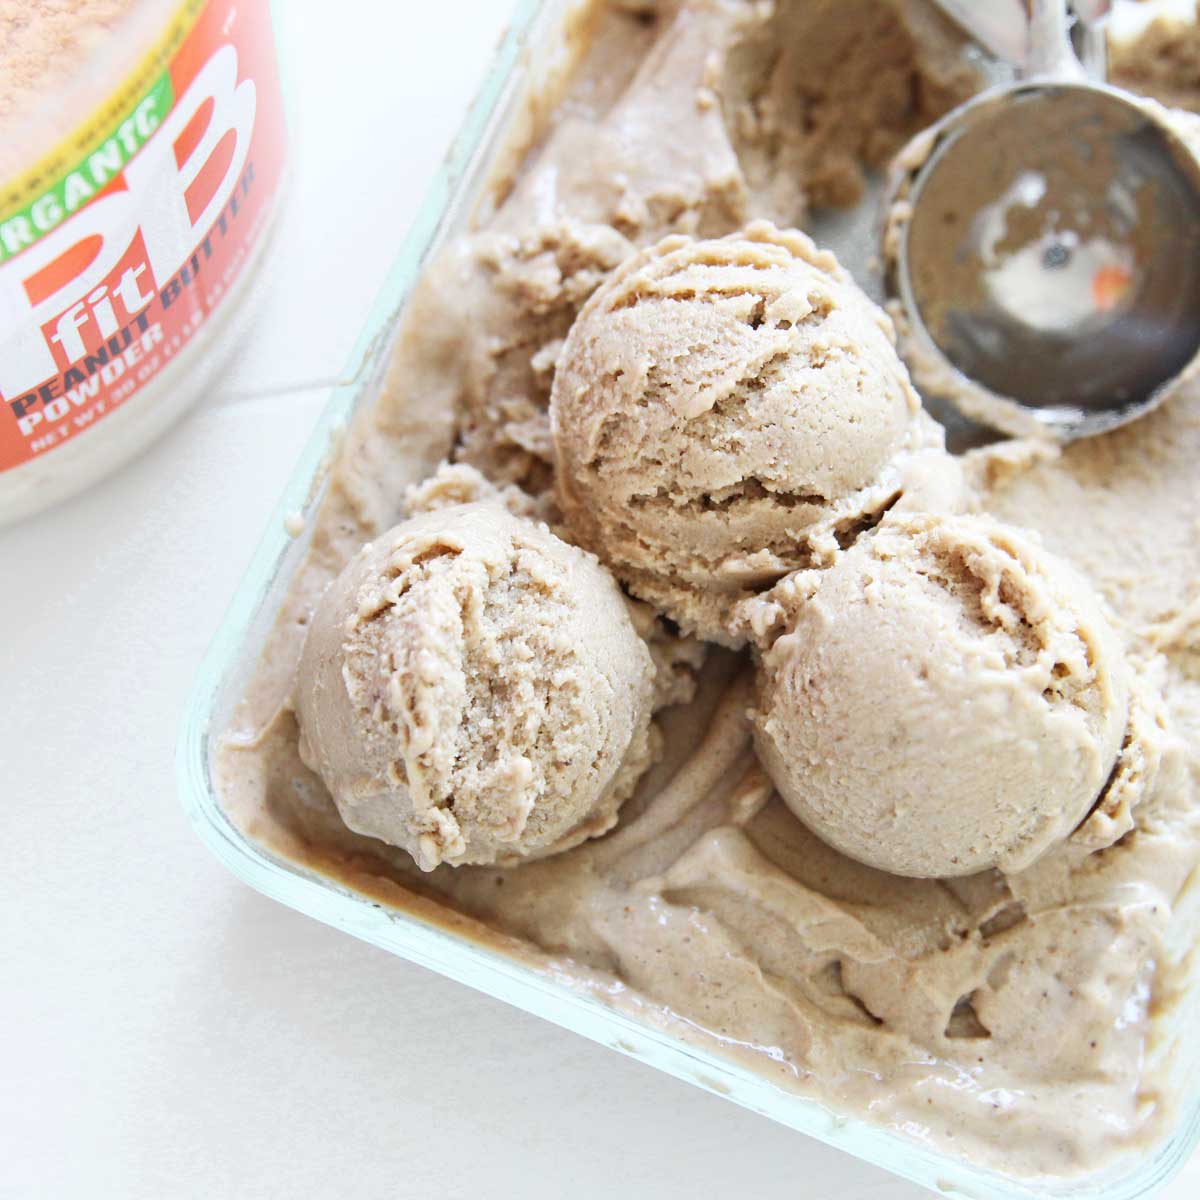 100-Calorie PB Fit Nice Cream Recipe - Canned Chickpea Yeast Bread